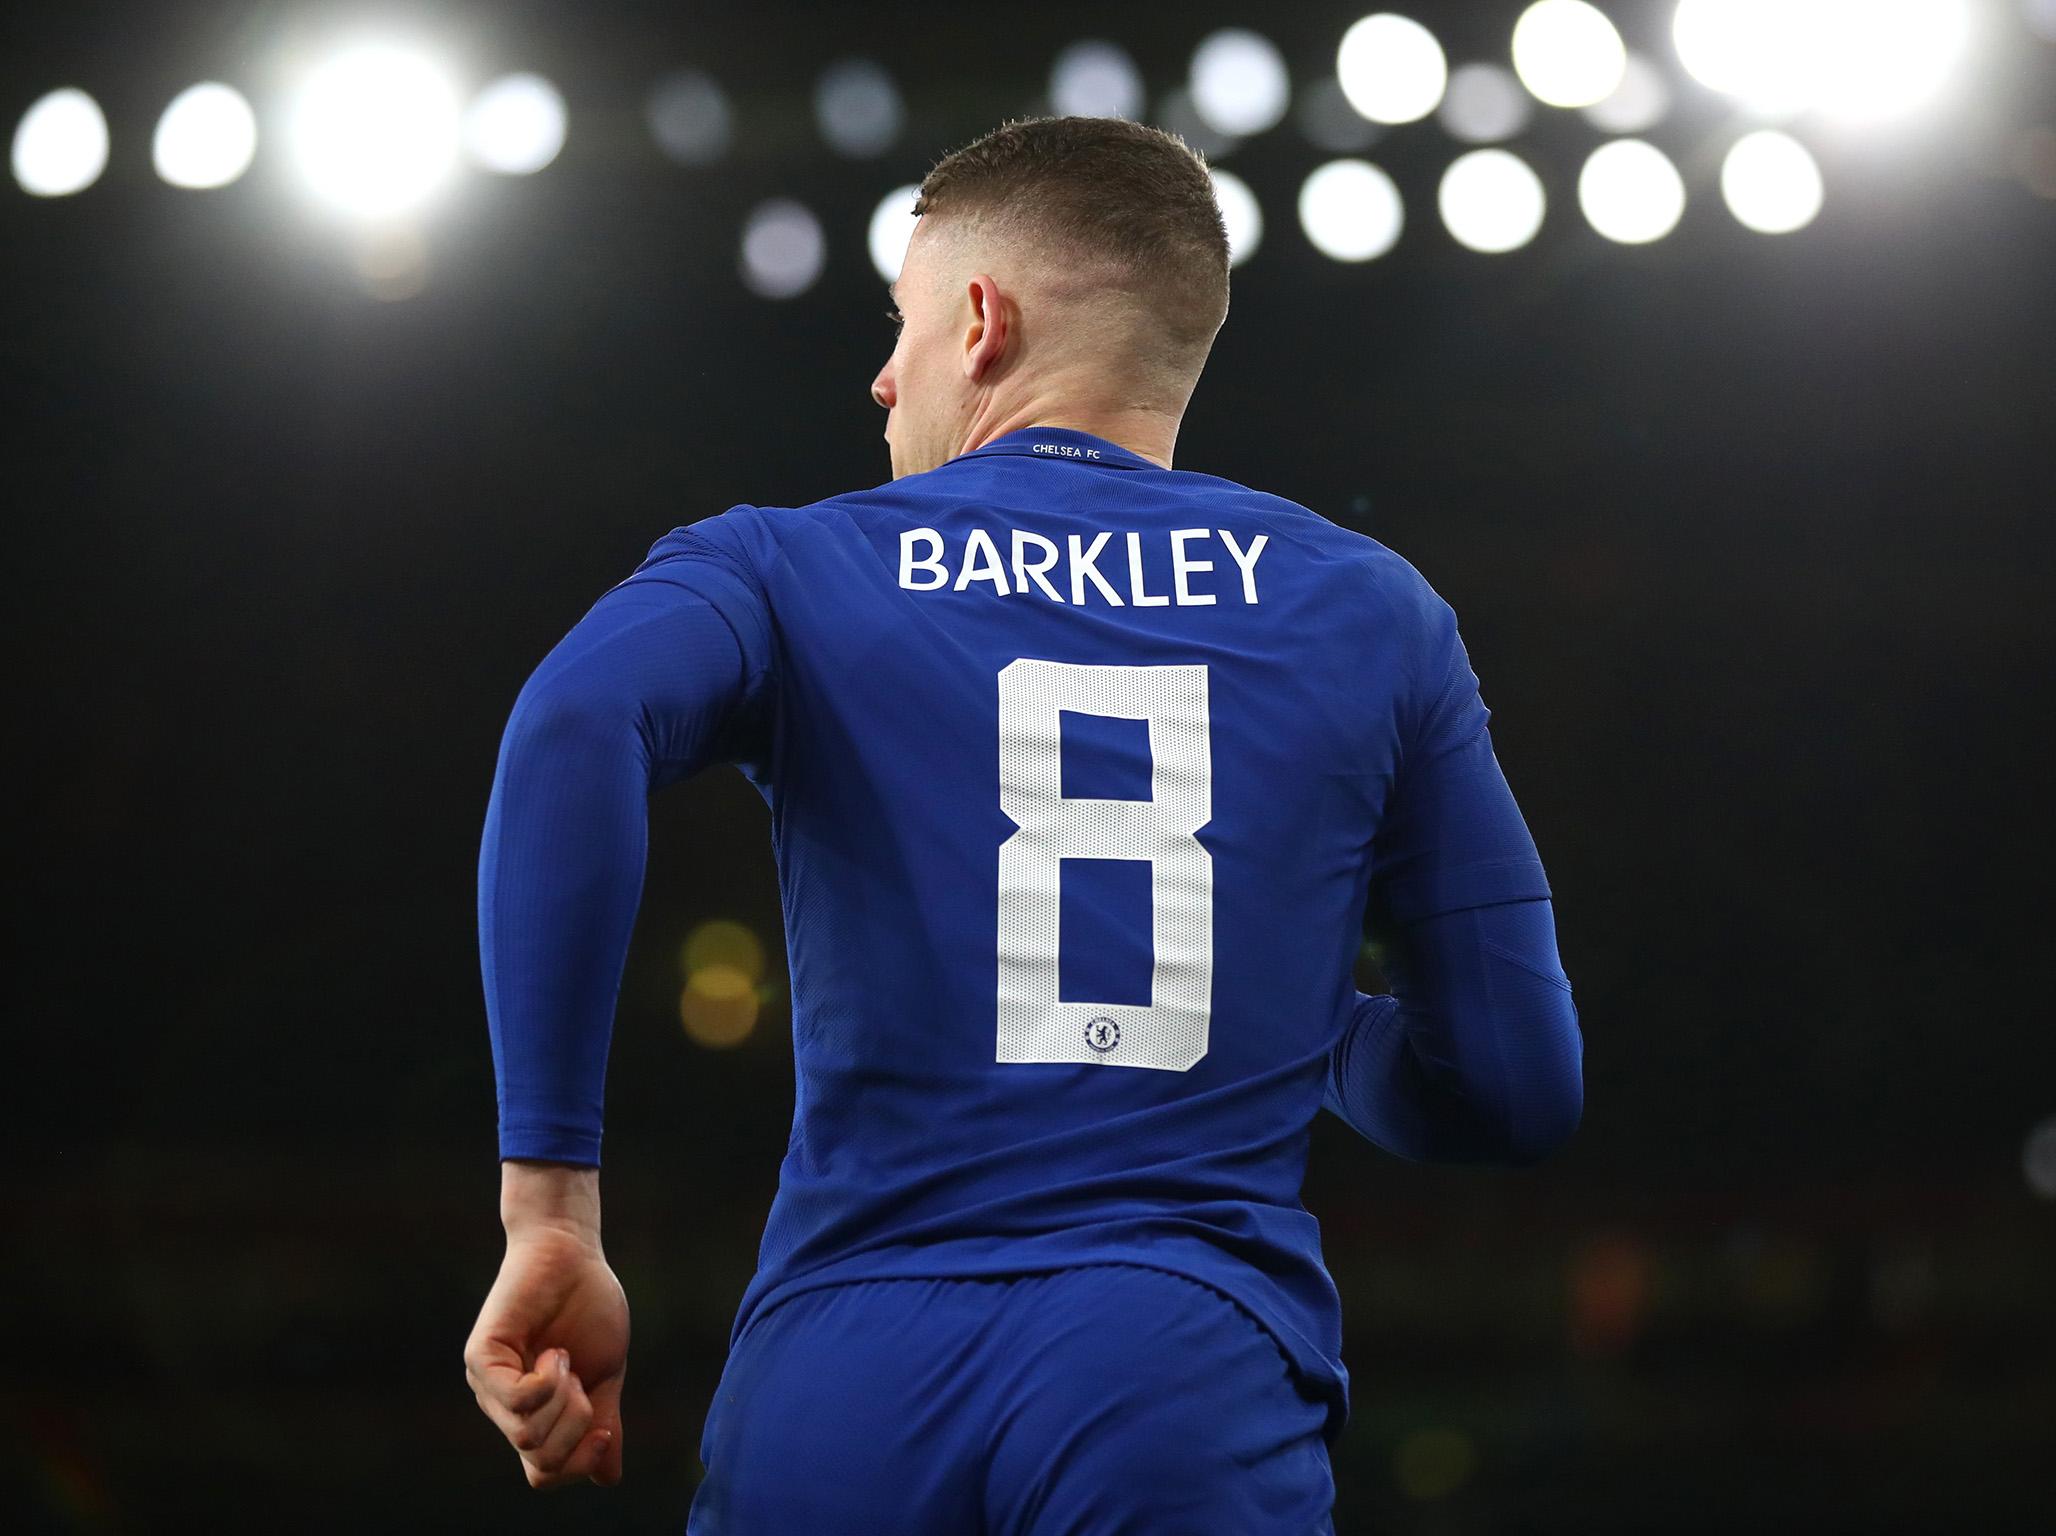 Ross Barkley has the weight of Frank Lampard's No8 on his back